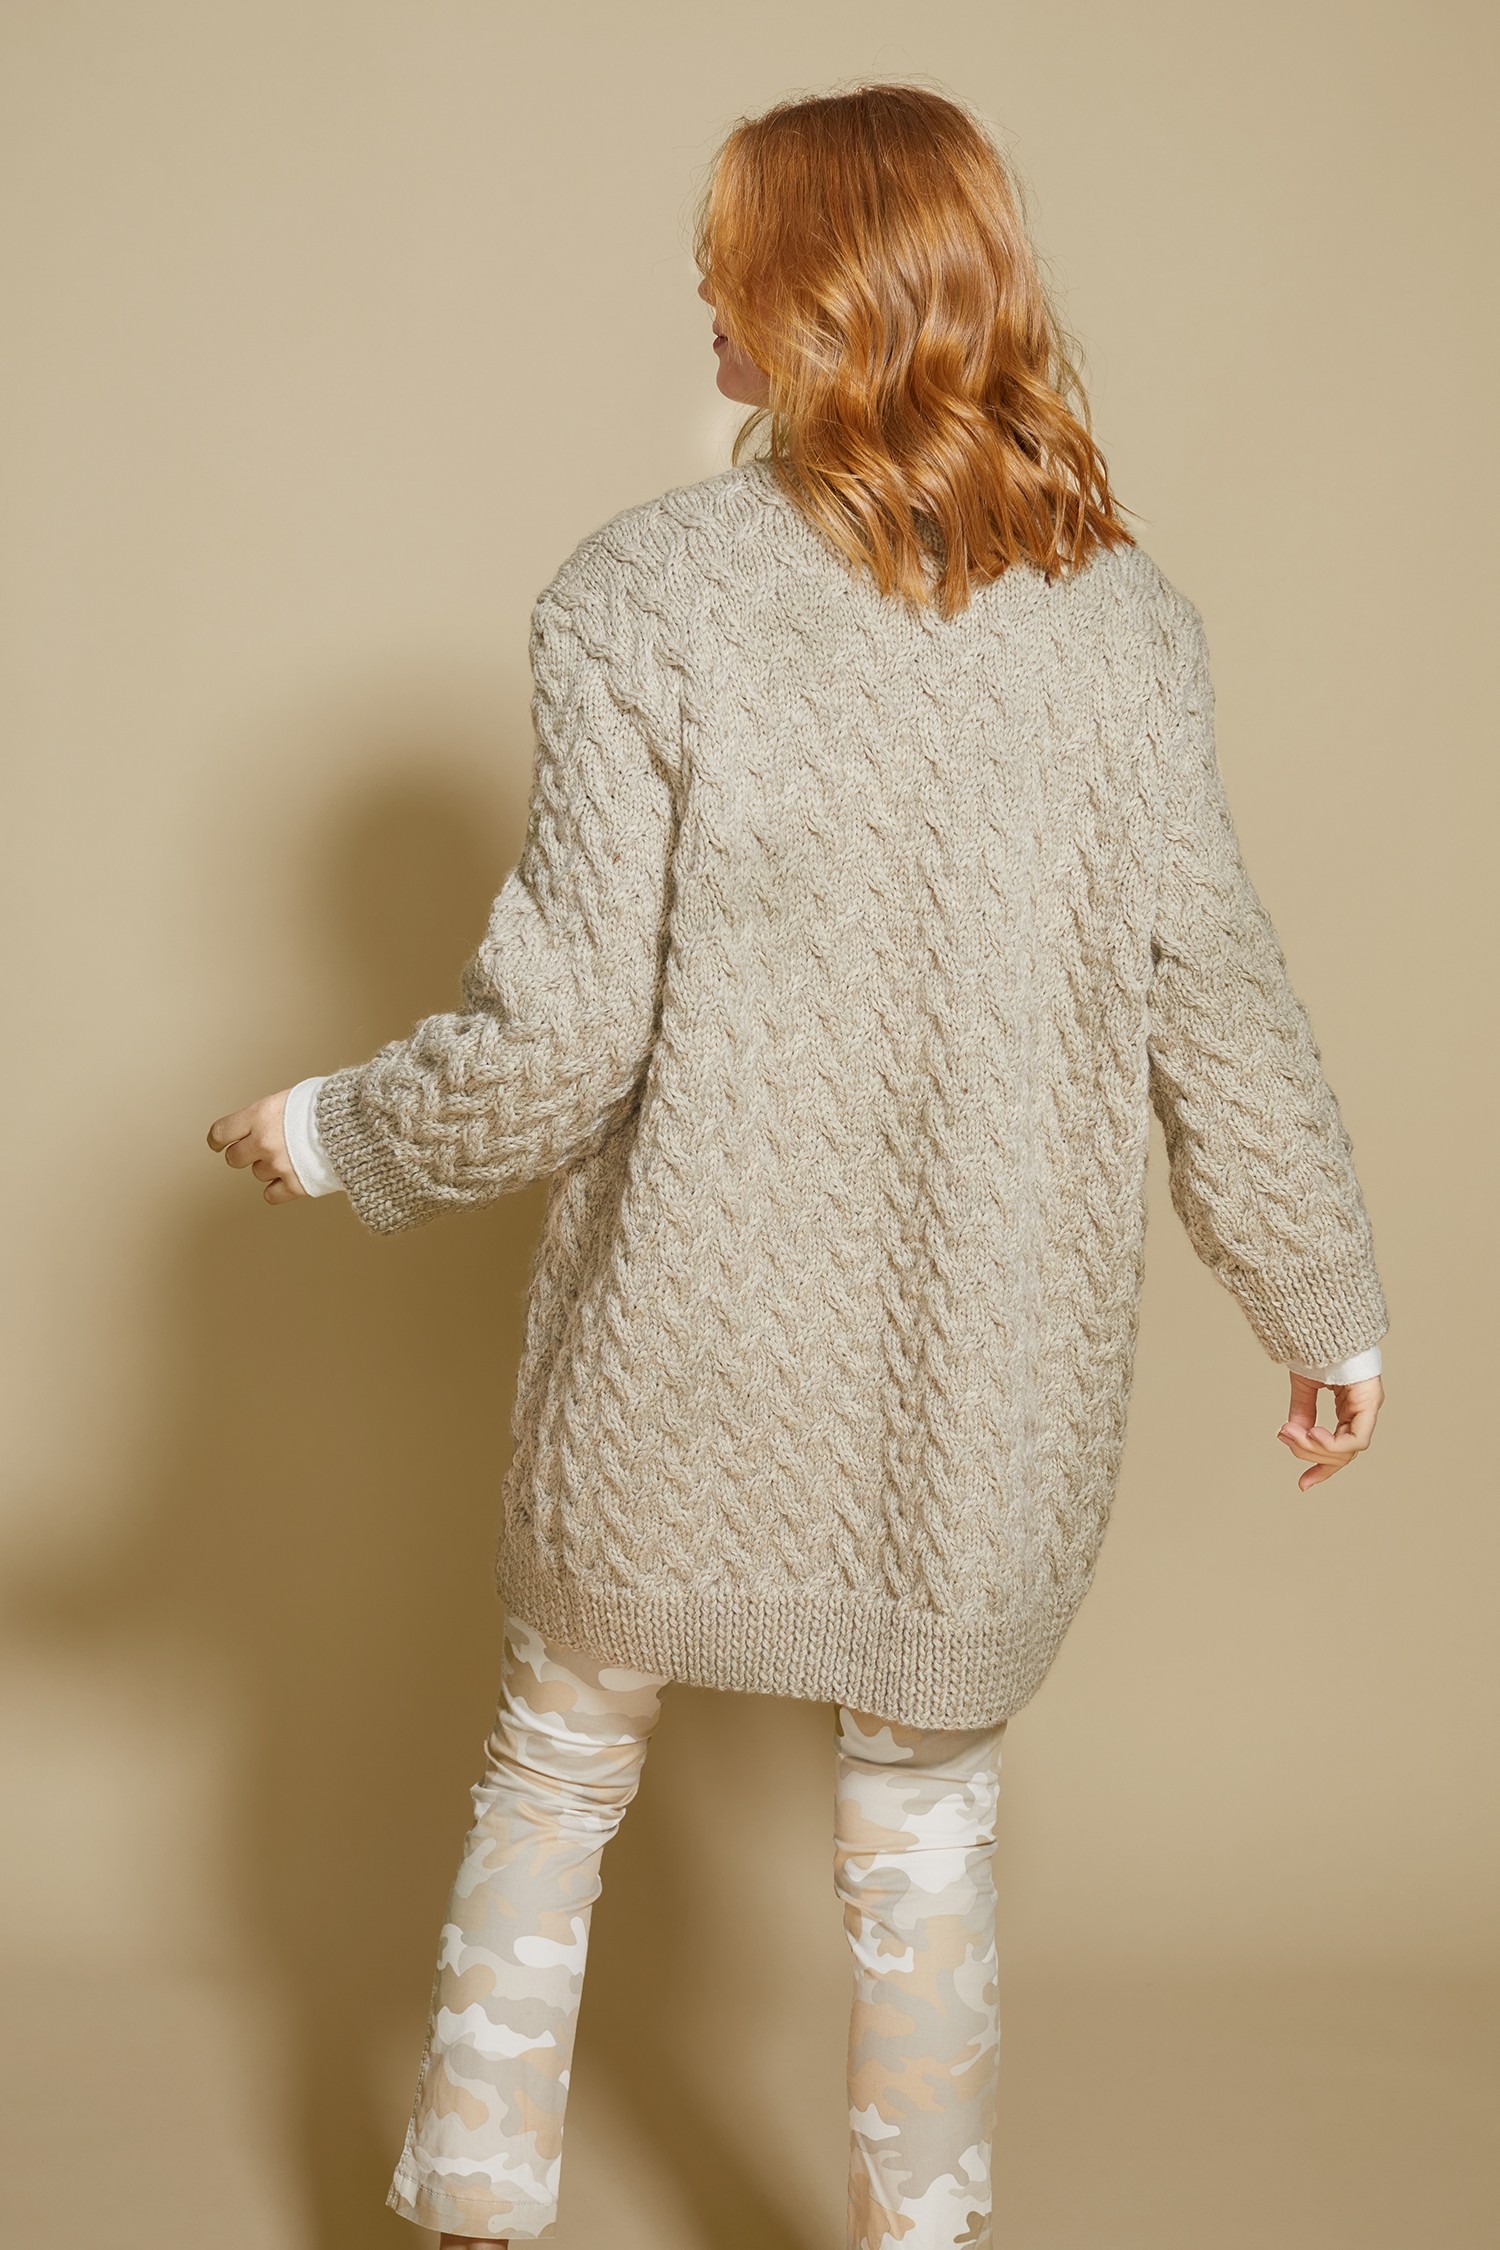 Free-Knitting-Pattern-for-an-Oversized-Cable-Cardigan-4 ...